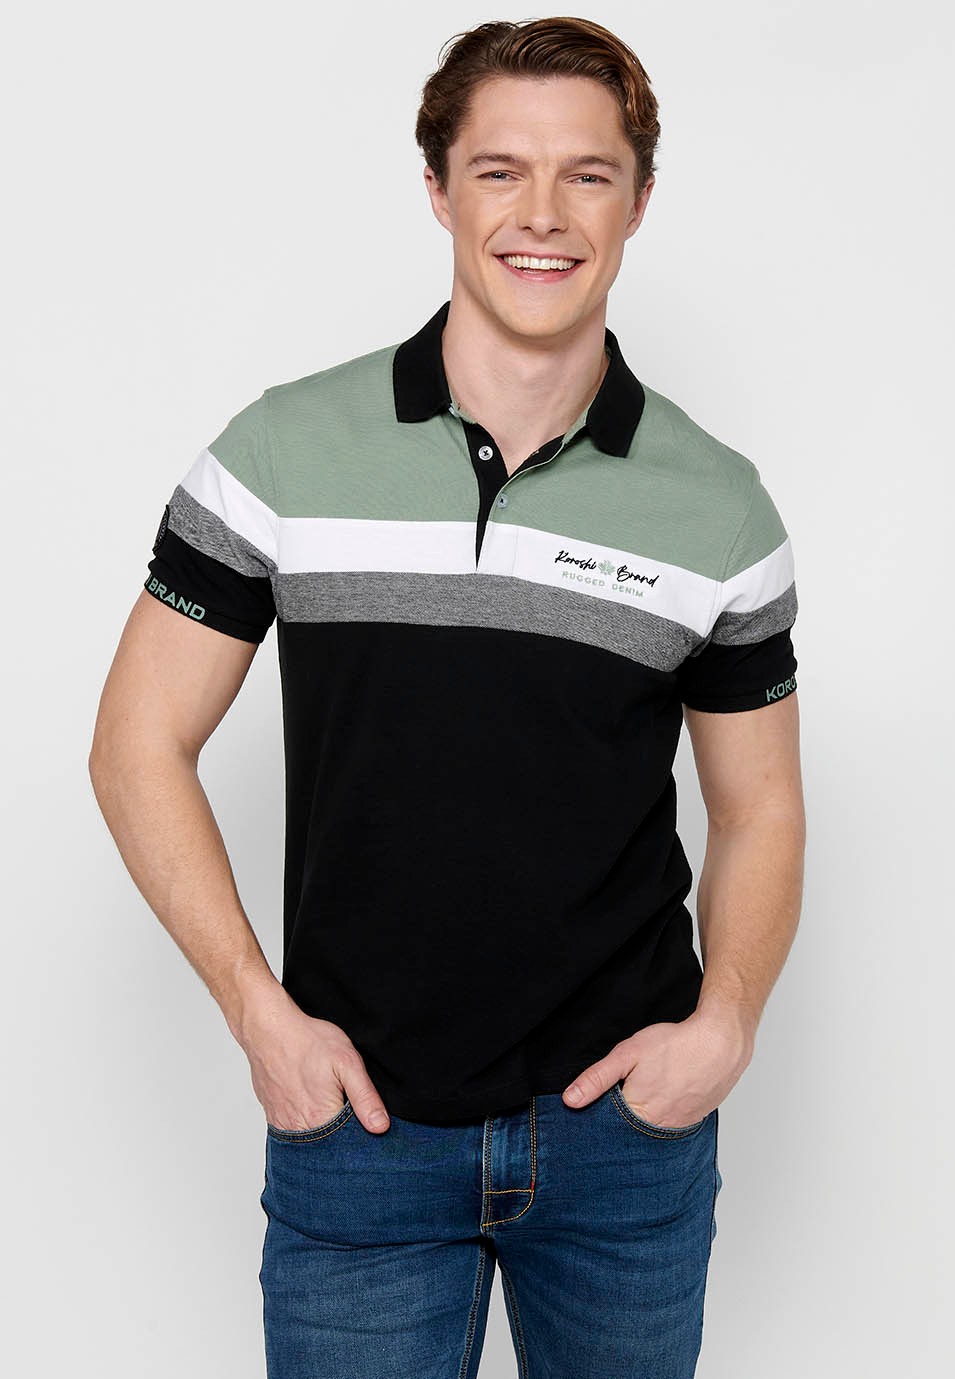 100% cotton short-sleeved polo shirt, striped detail on the chest, black color for men